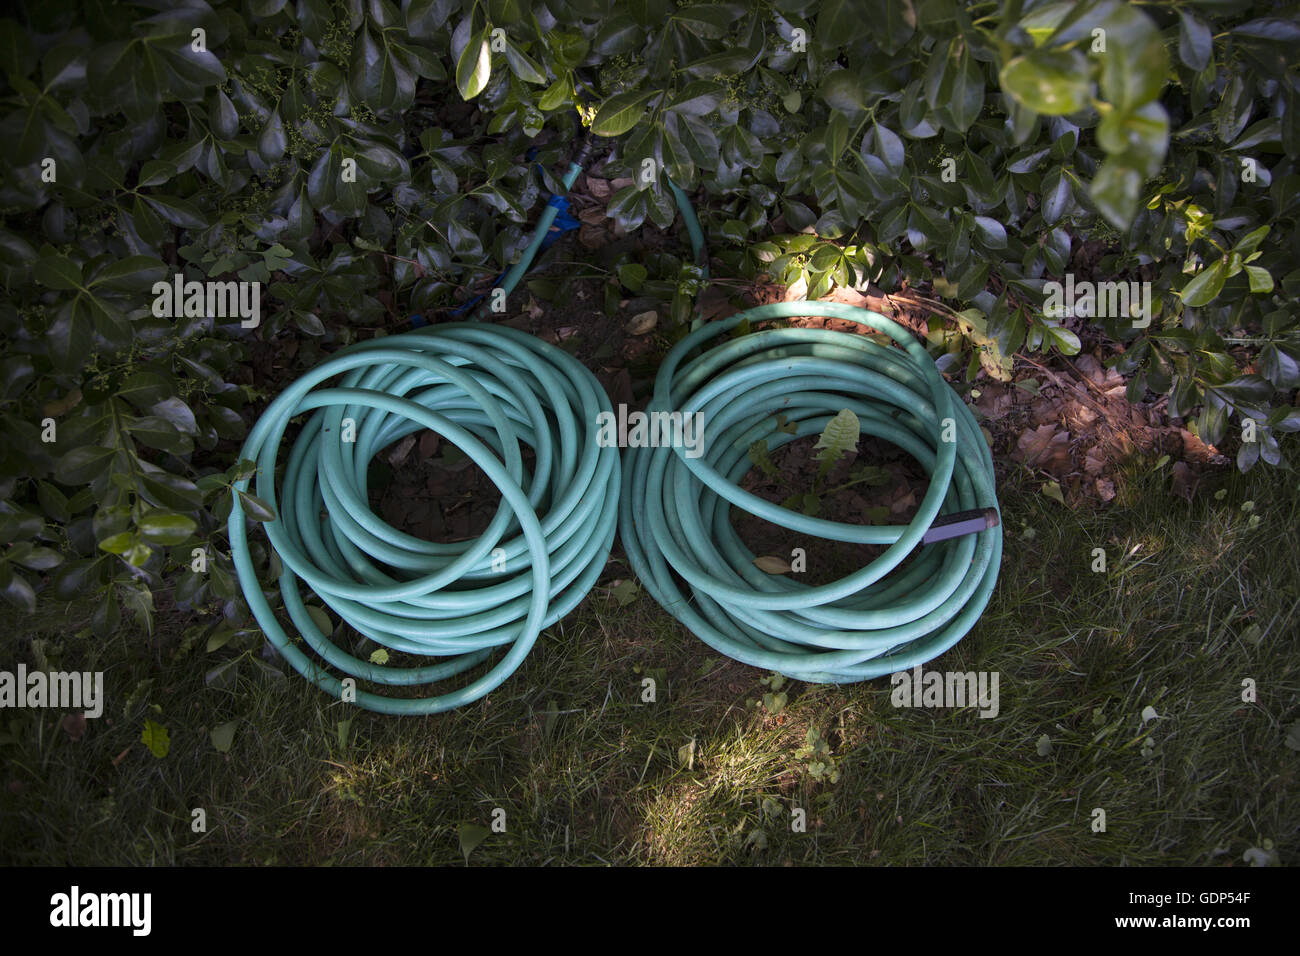 Wound up garden hoses. Stock Photo